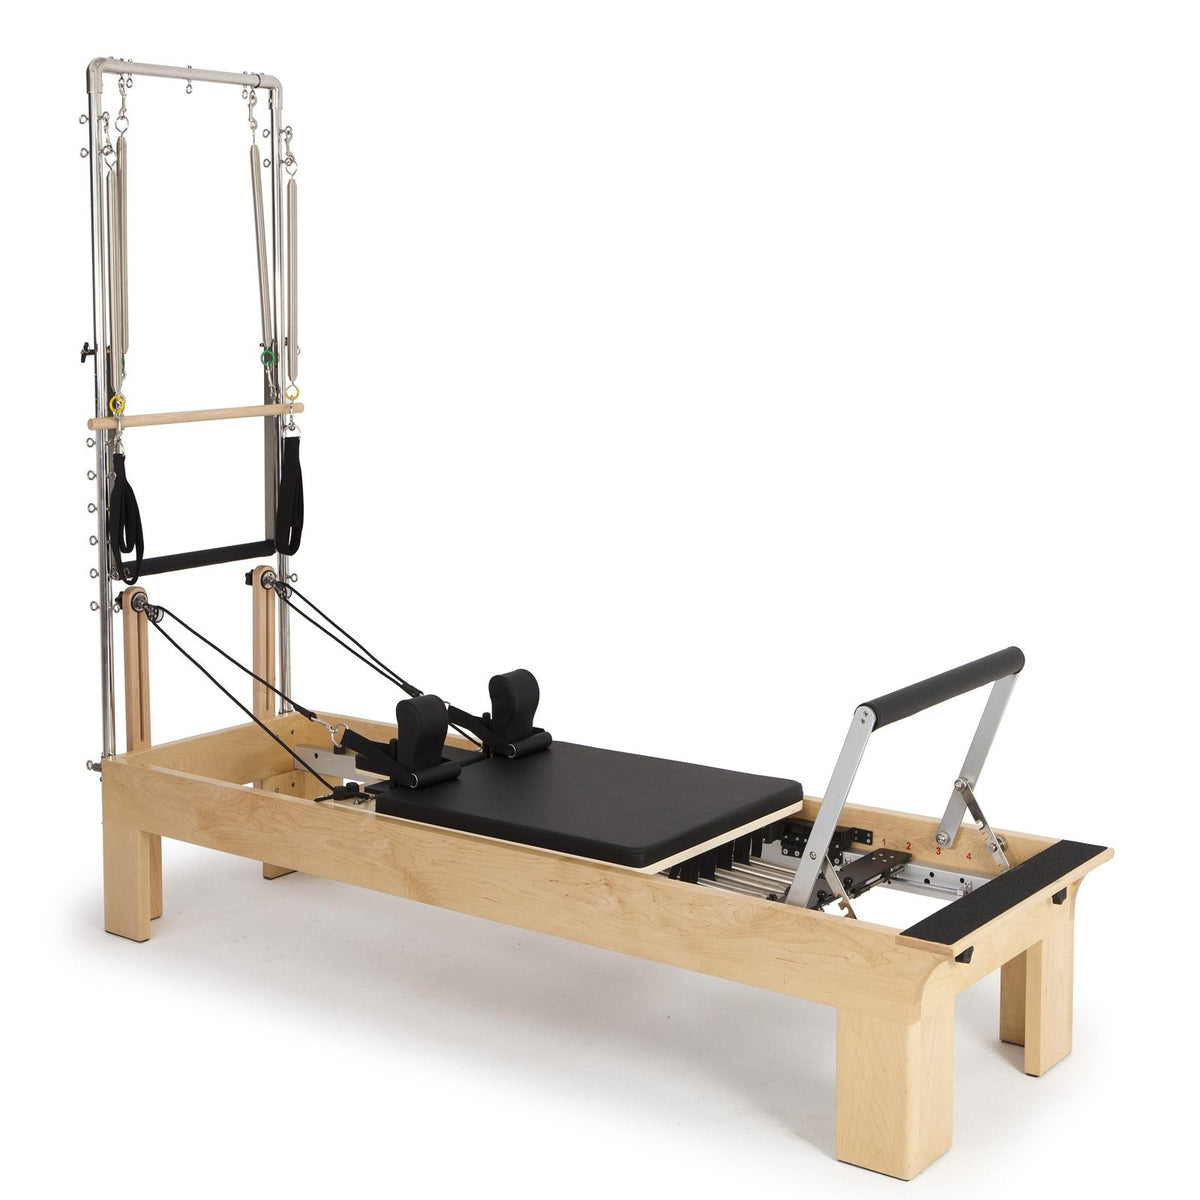 Meet the Classical Pilates Reformer Device